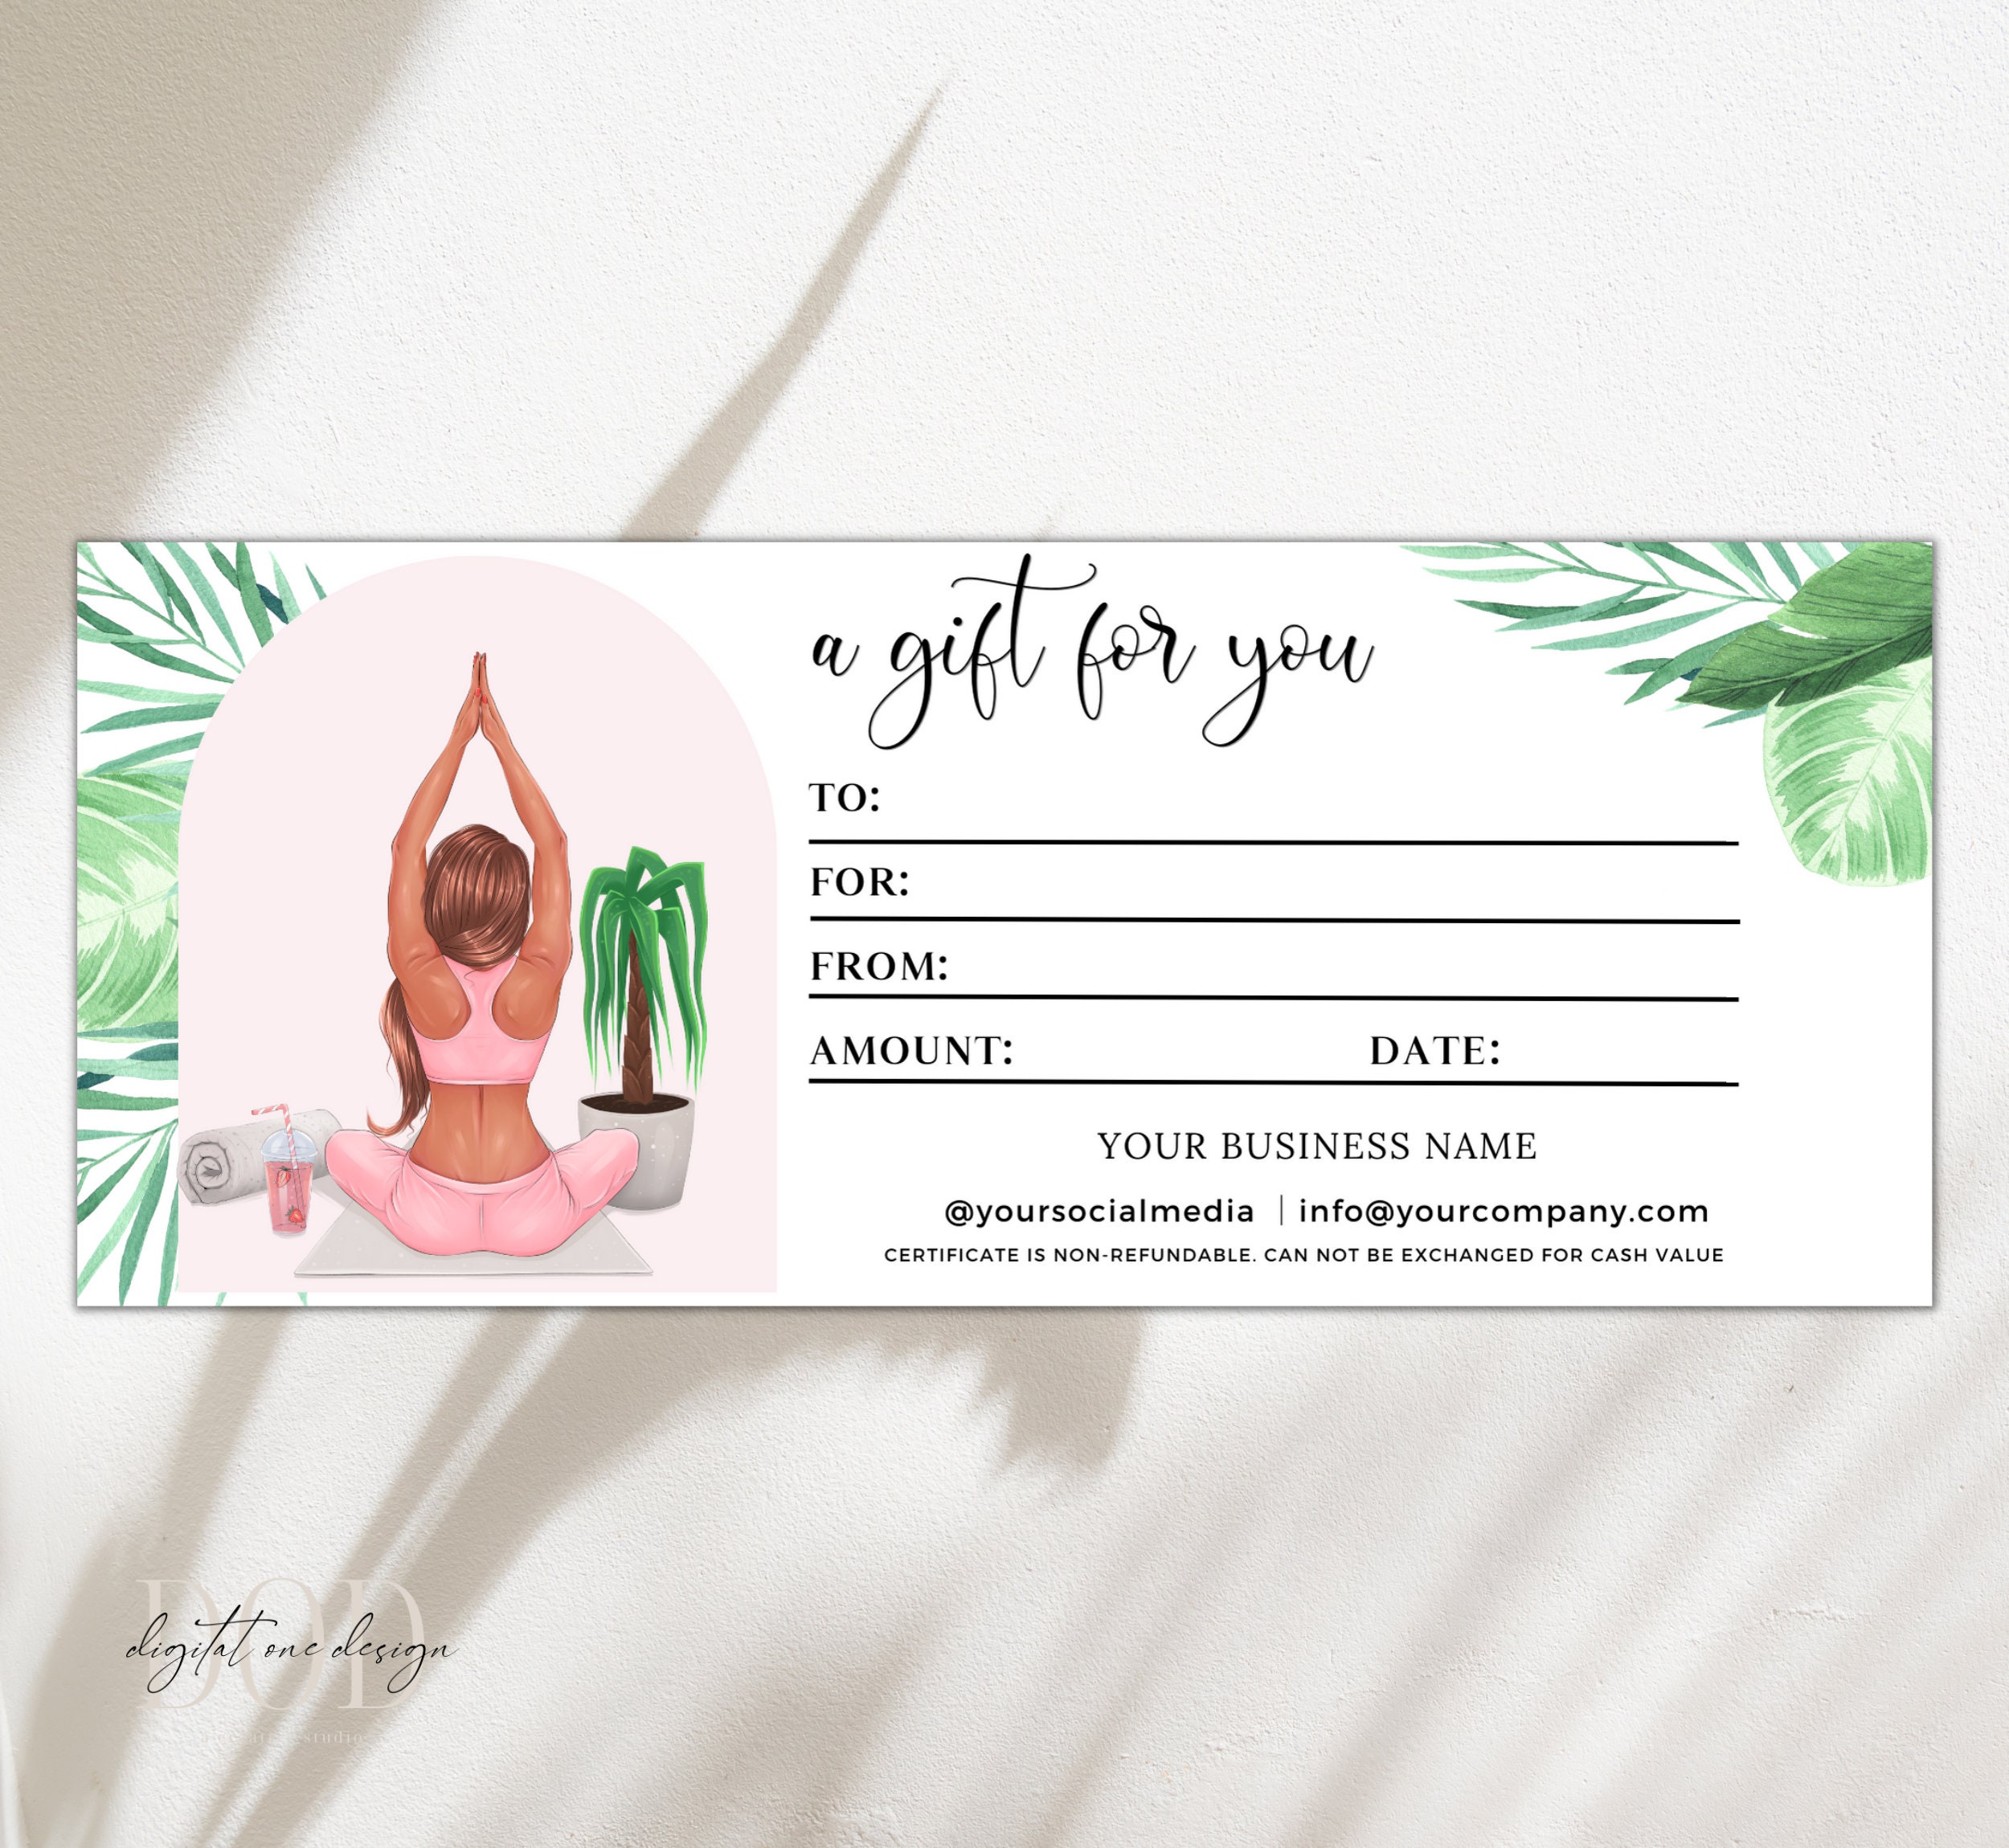 Yoga Gift Certificate Template, Fitness Gift Voucher, A Gift for